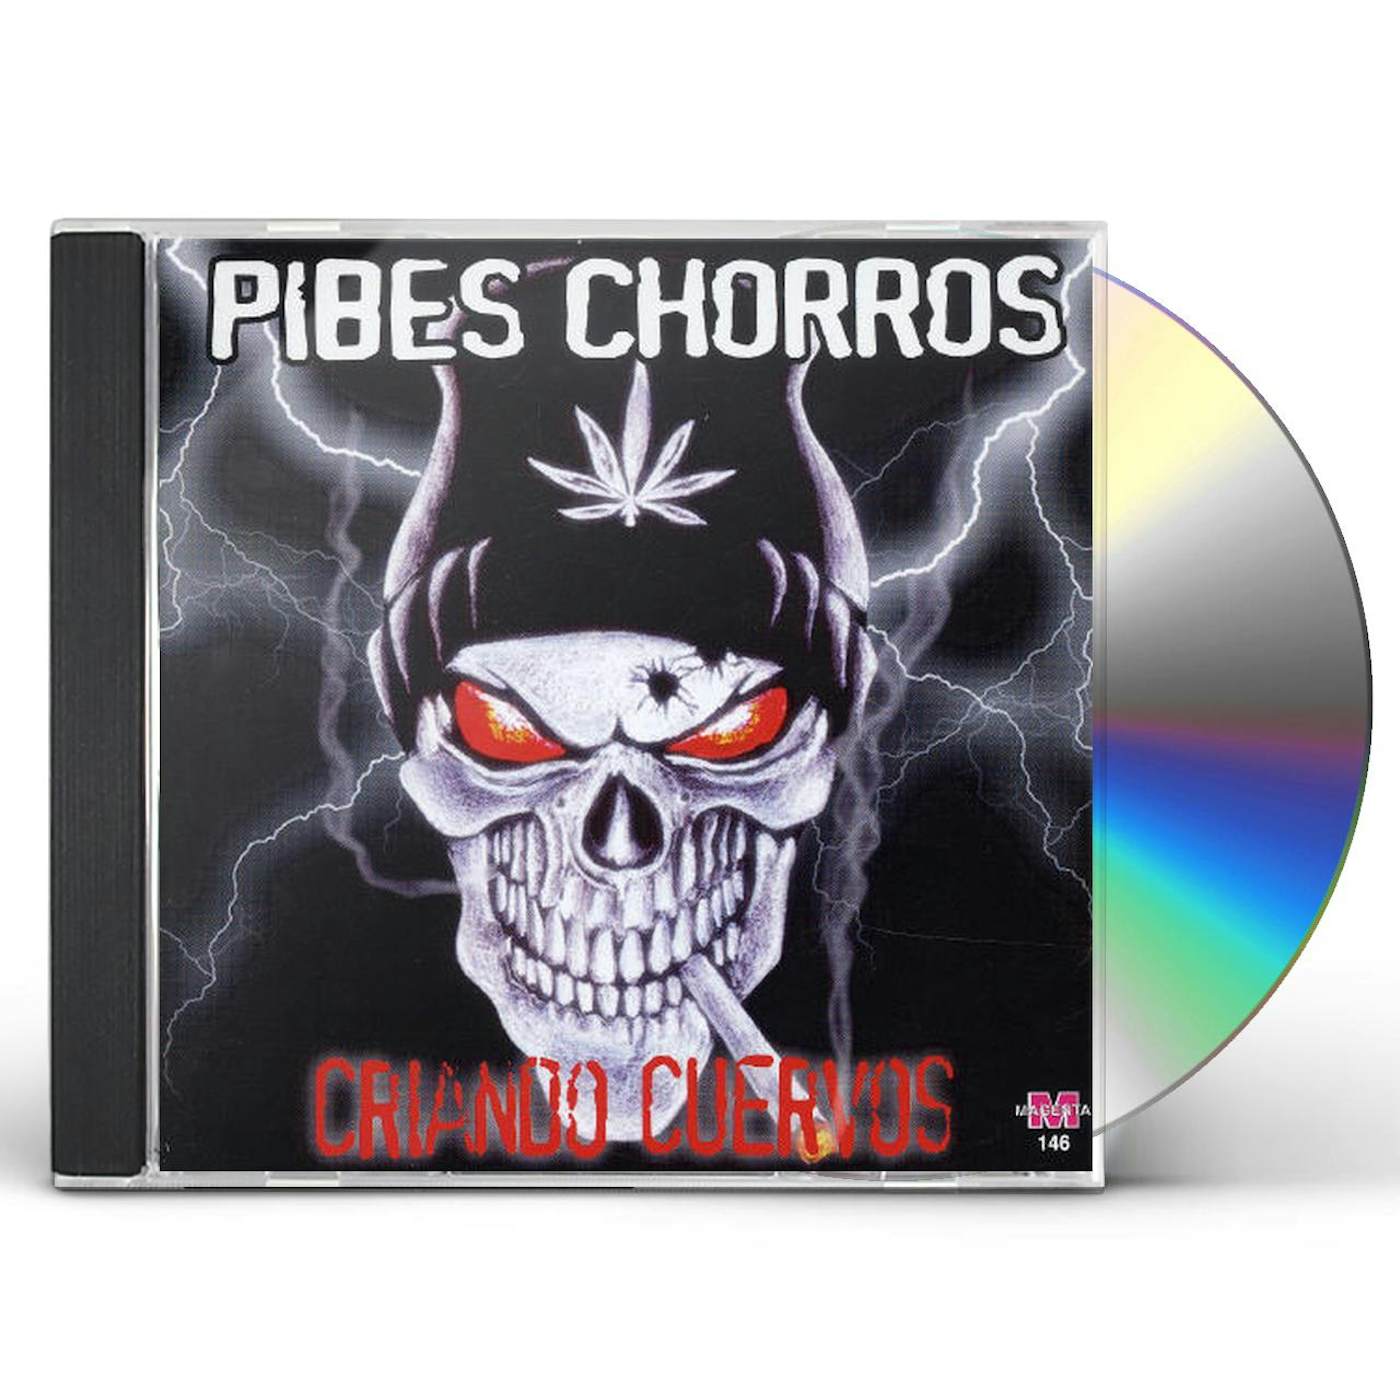 Stream Music from Artists Like Pibes Chorros